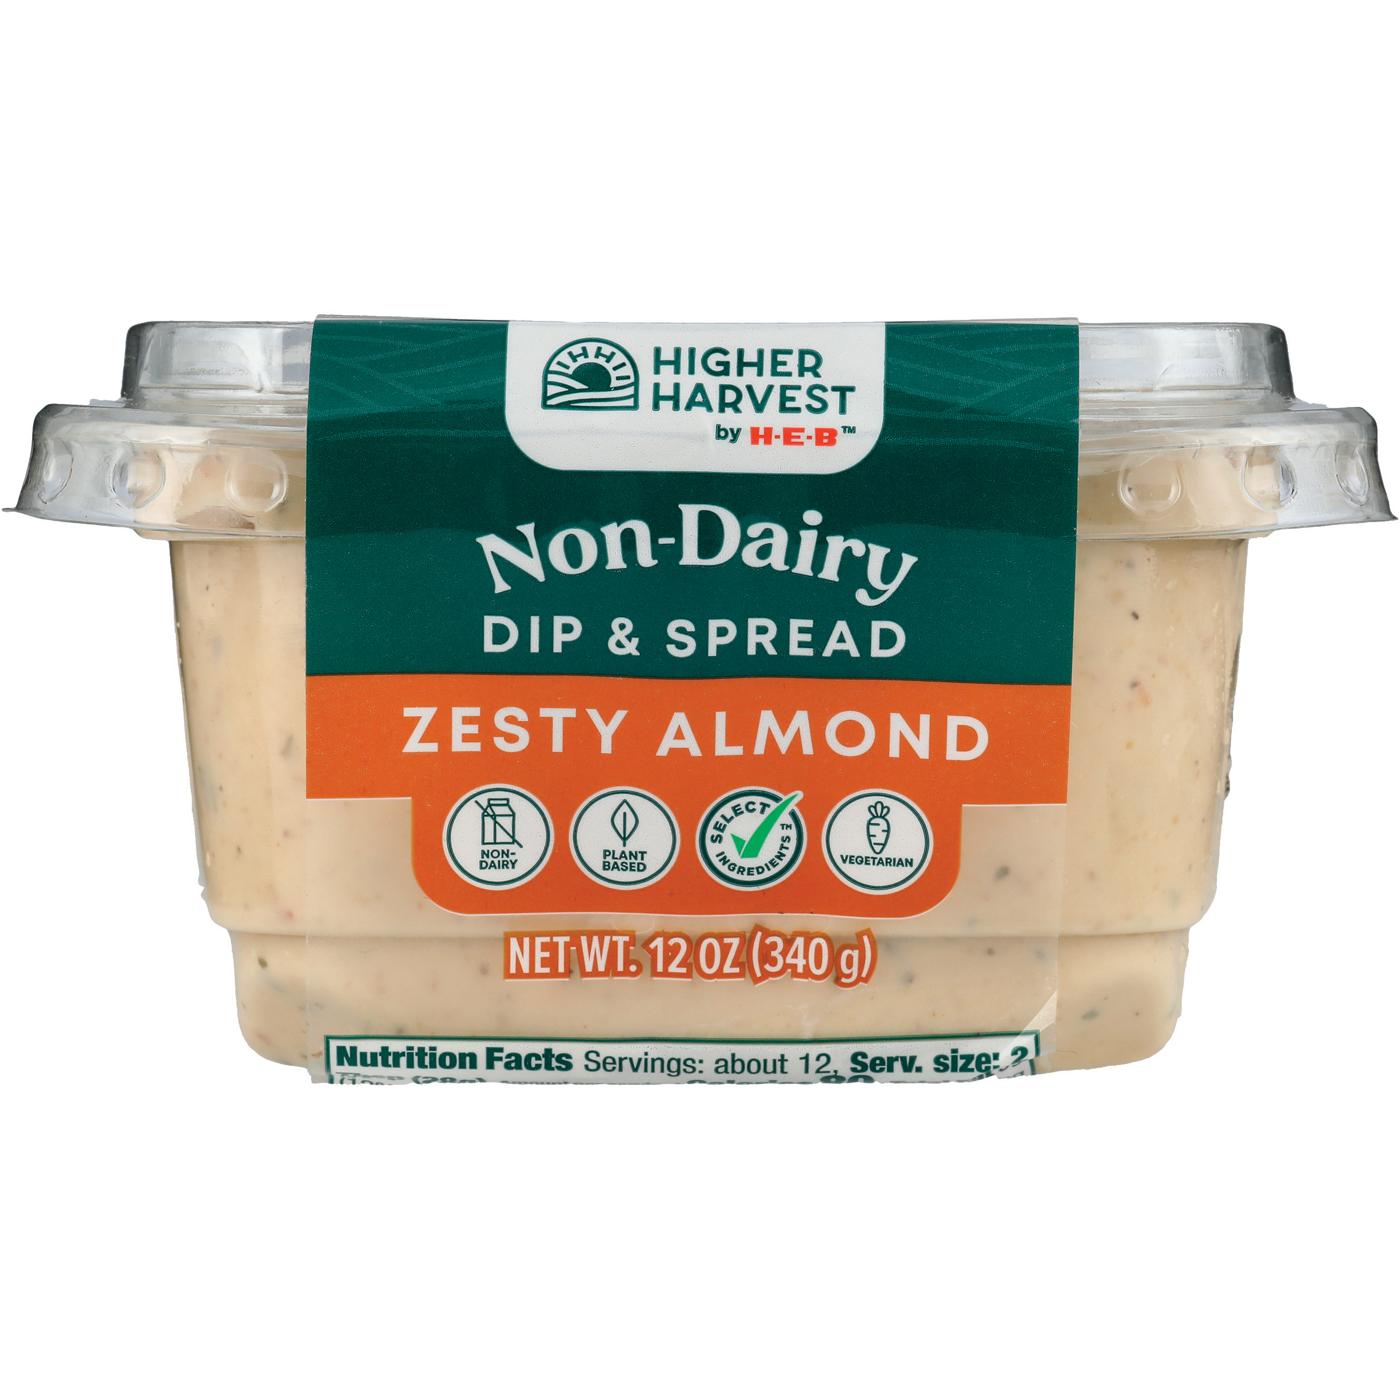 Higher Harvest by H-E-B Non-Dairy Dip & Spread - Zesty Almond; image 1 of 3